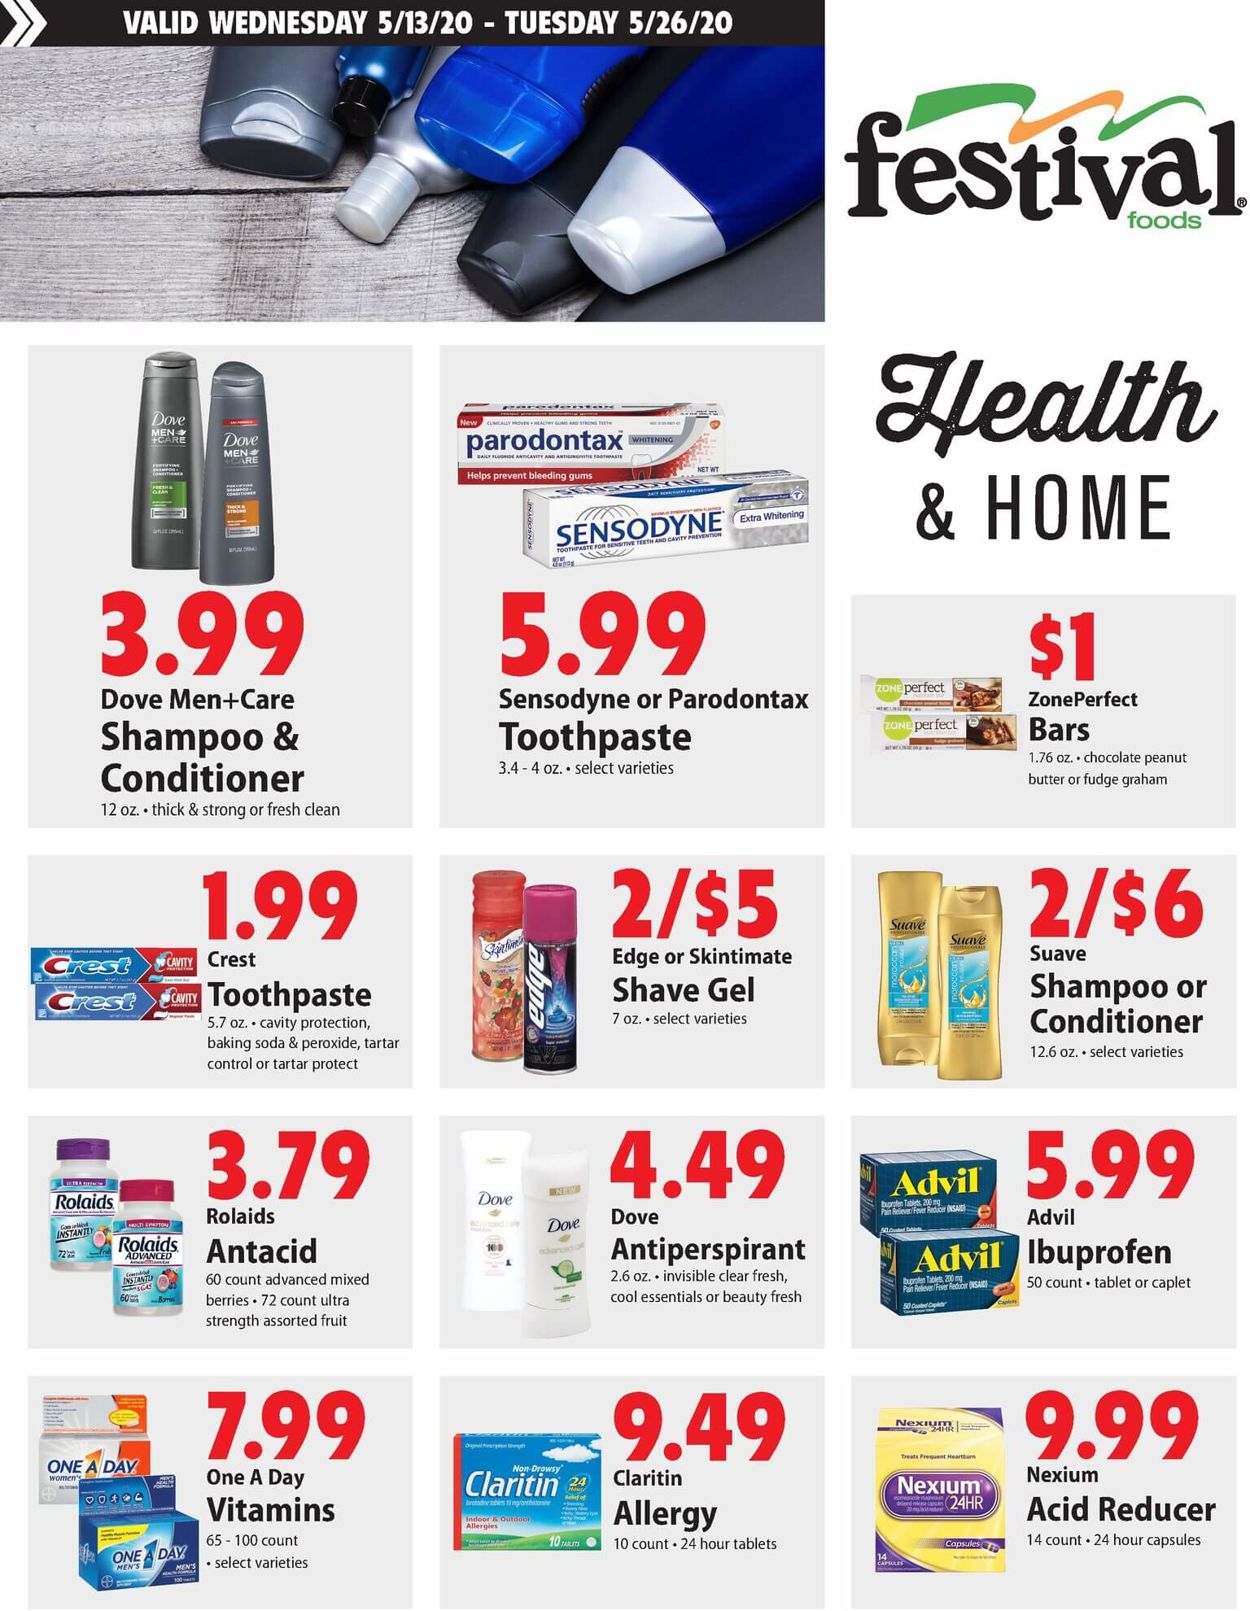 Festival Foods Weekly Ad Circular - valid 05/13-05/19/2020 (Page 5)